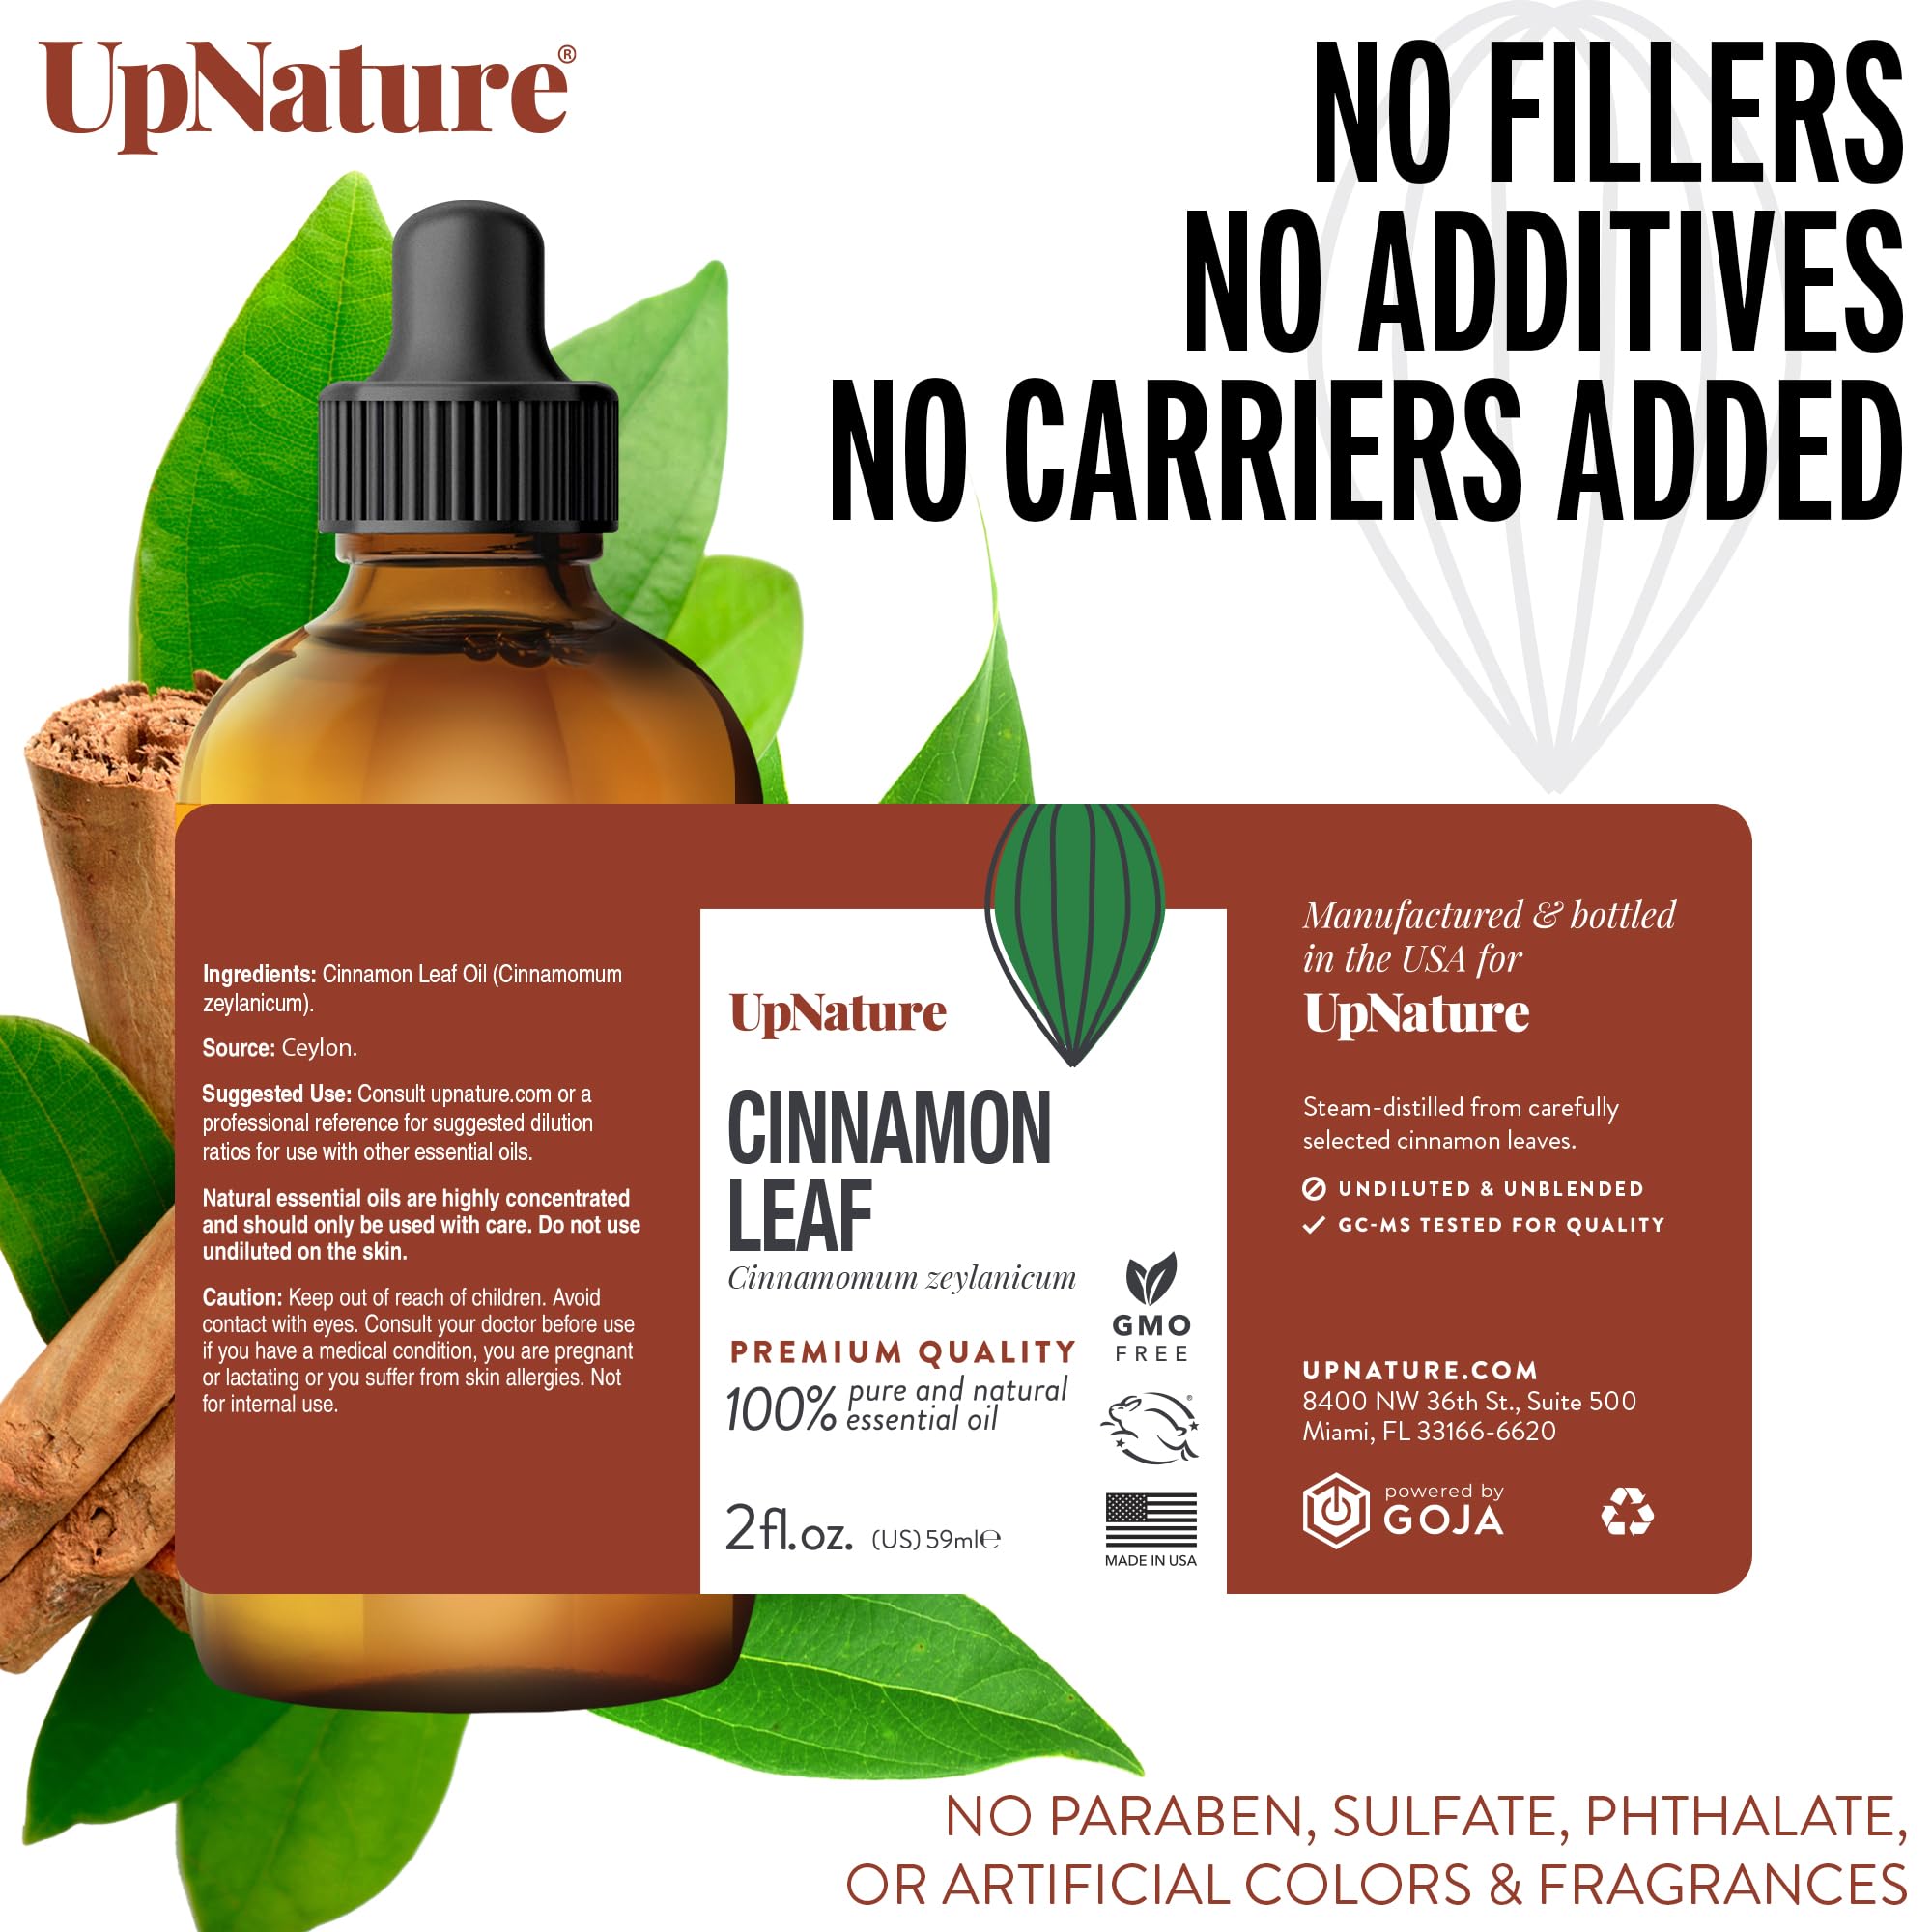 UpNature Cinnamon Essential Oil - 100% Natural & Pure, Undiluted, Premium Quality Aromatherapy Oil- Cinnamon Leaf Essential Oil Natural Pain Ease, Alleviates Muscle Aches, Sickness & Boost Mood, 2oz